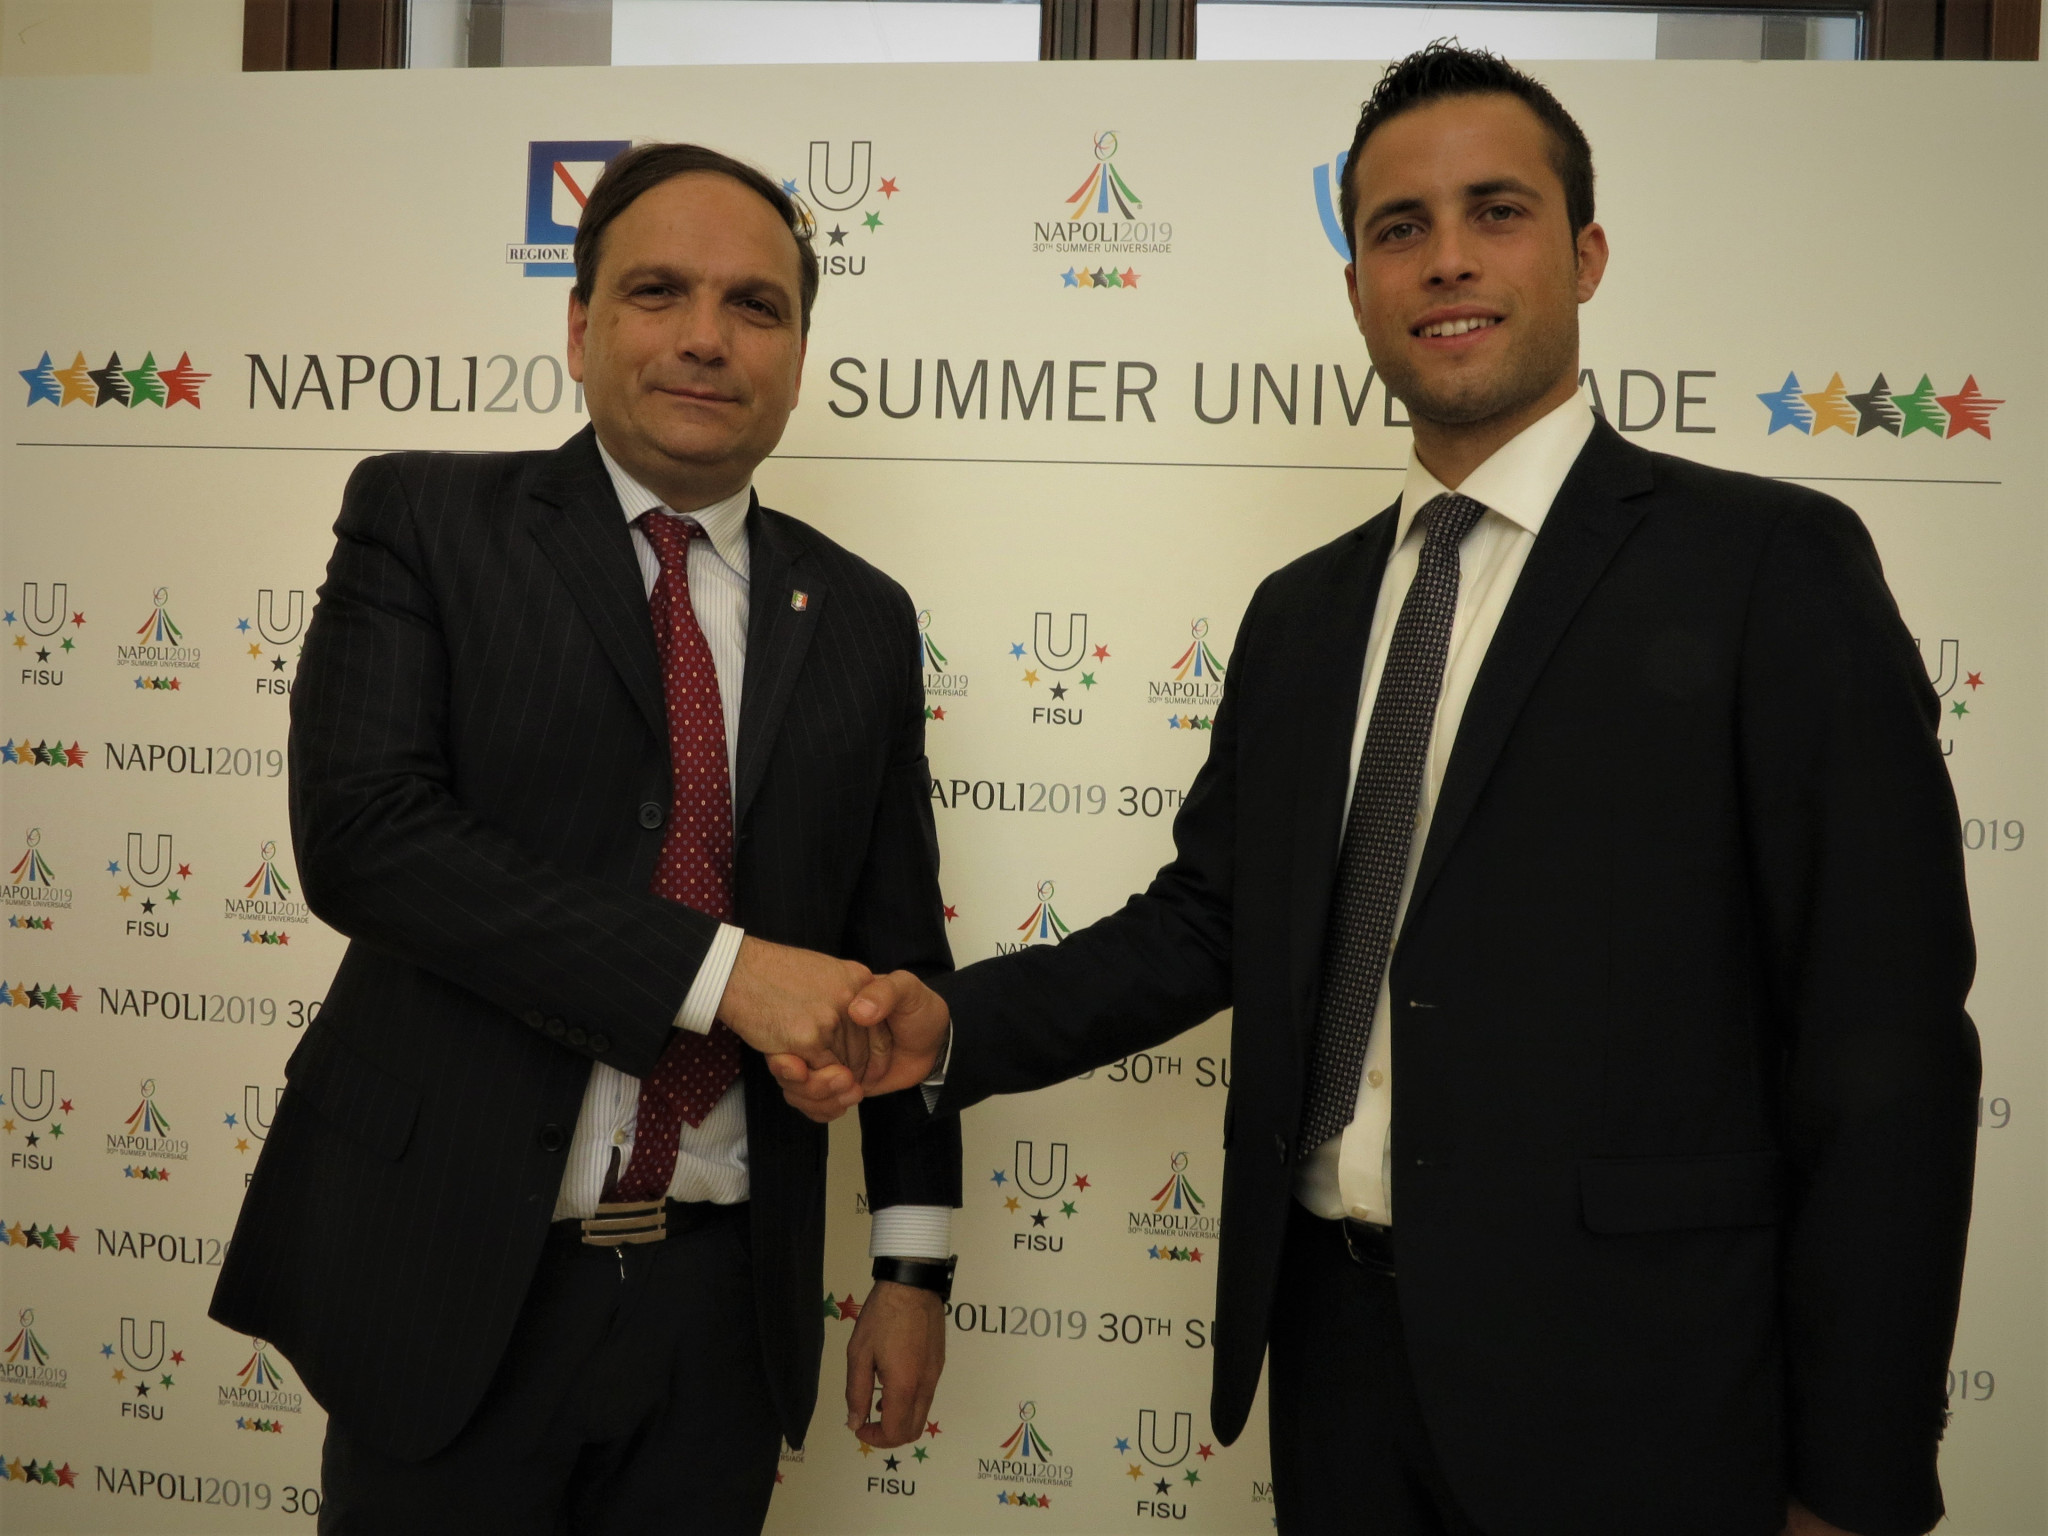 Naples 2019 Summer Universiade's Special Commissioner Gianluca Basile, left, at the signing of the Memorandum of Understanding with the Campania Youth Forum ©Napoli 2019